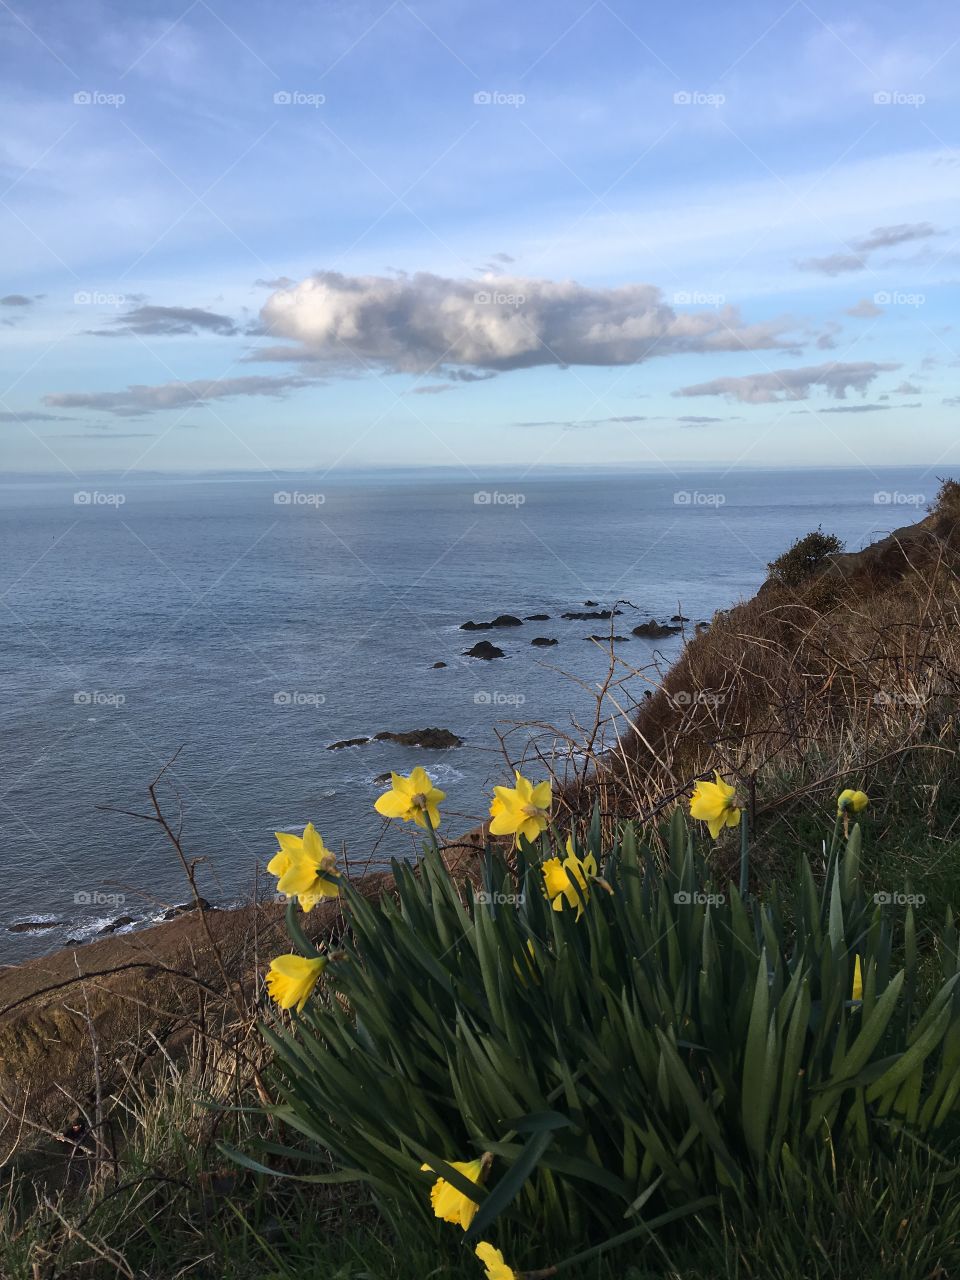 The bloom of the daffodils and the their North Devon view! This is the wonderful coastline between Ilfracombe and Lee Bay. I’m called here in all weather, but the look of spring is here. 